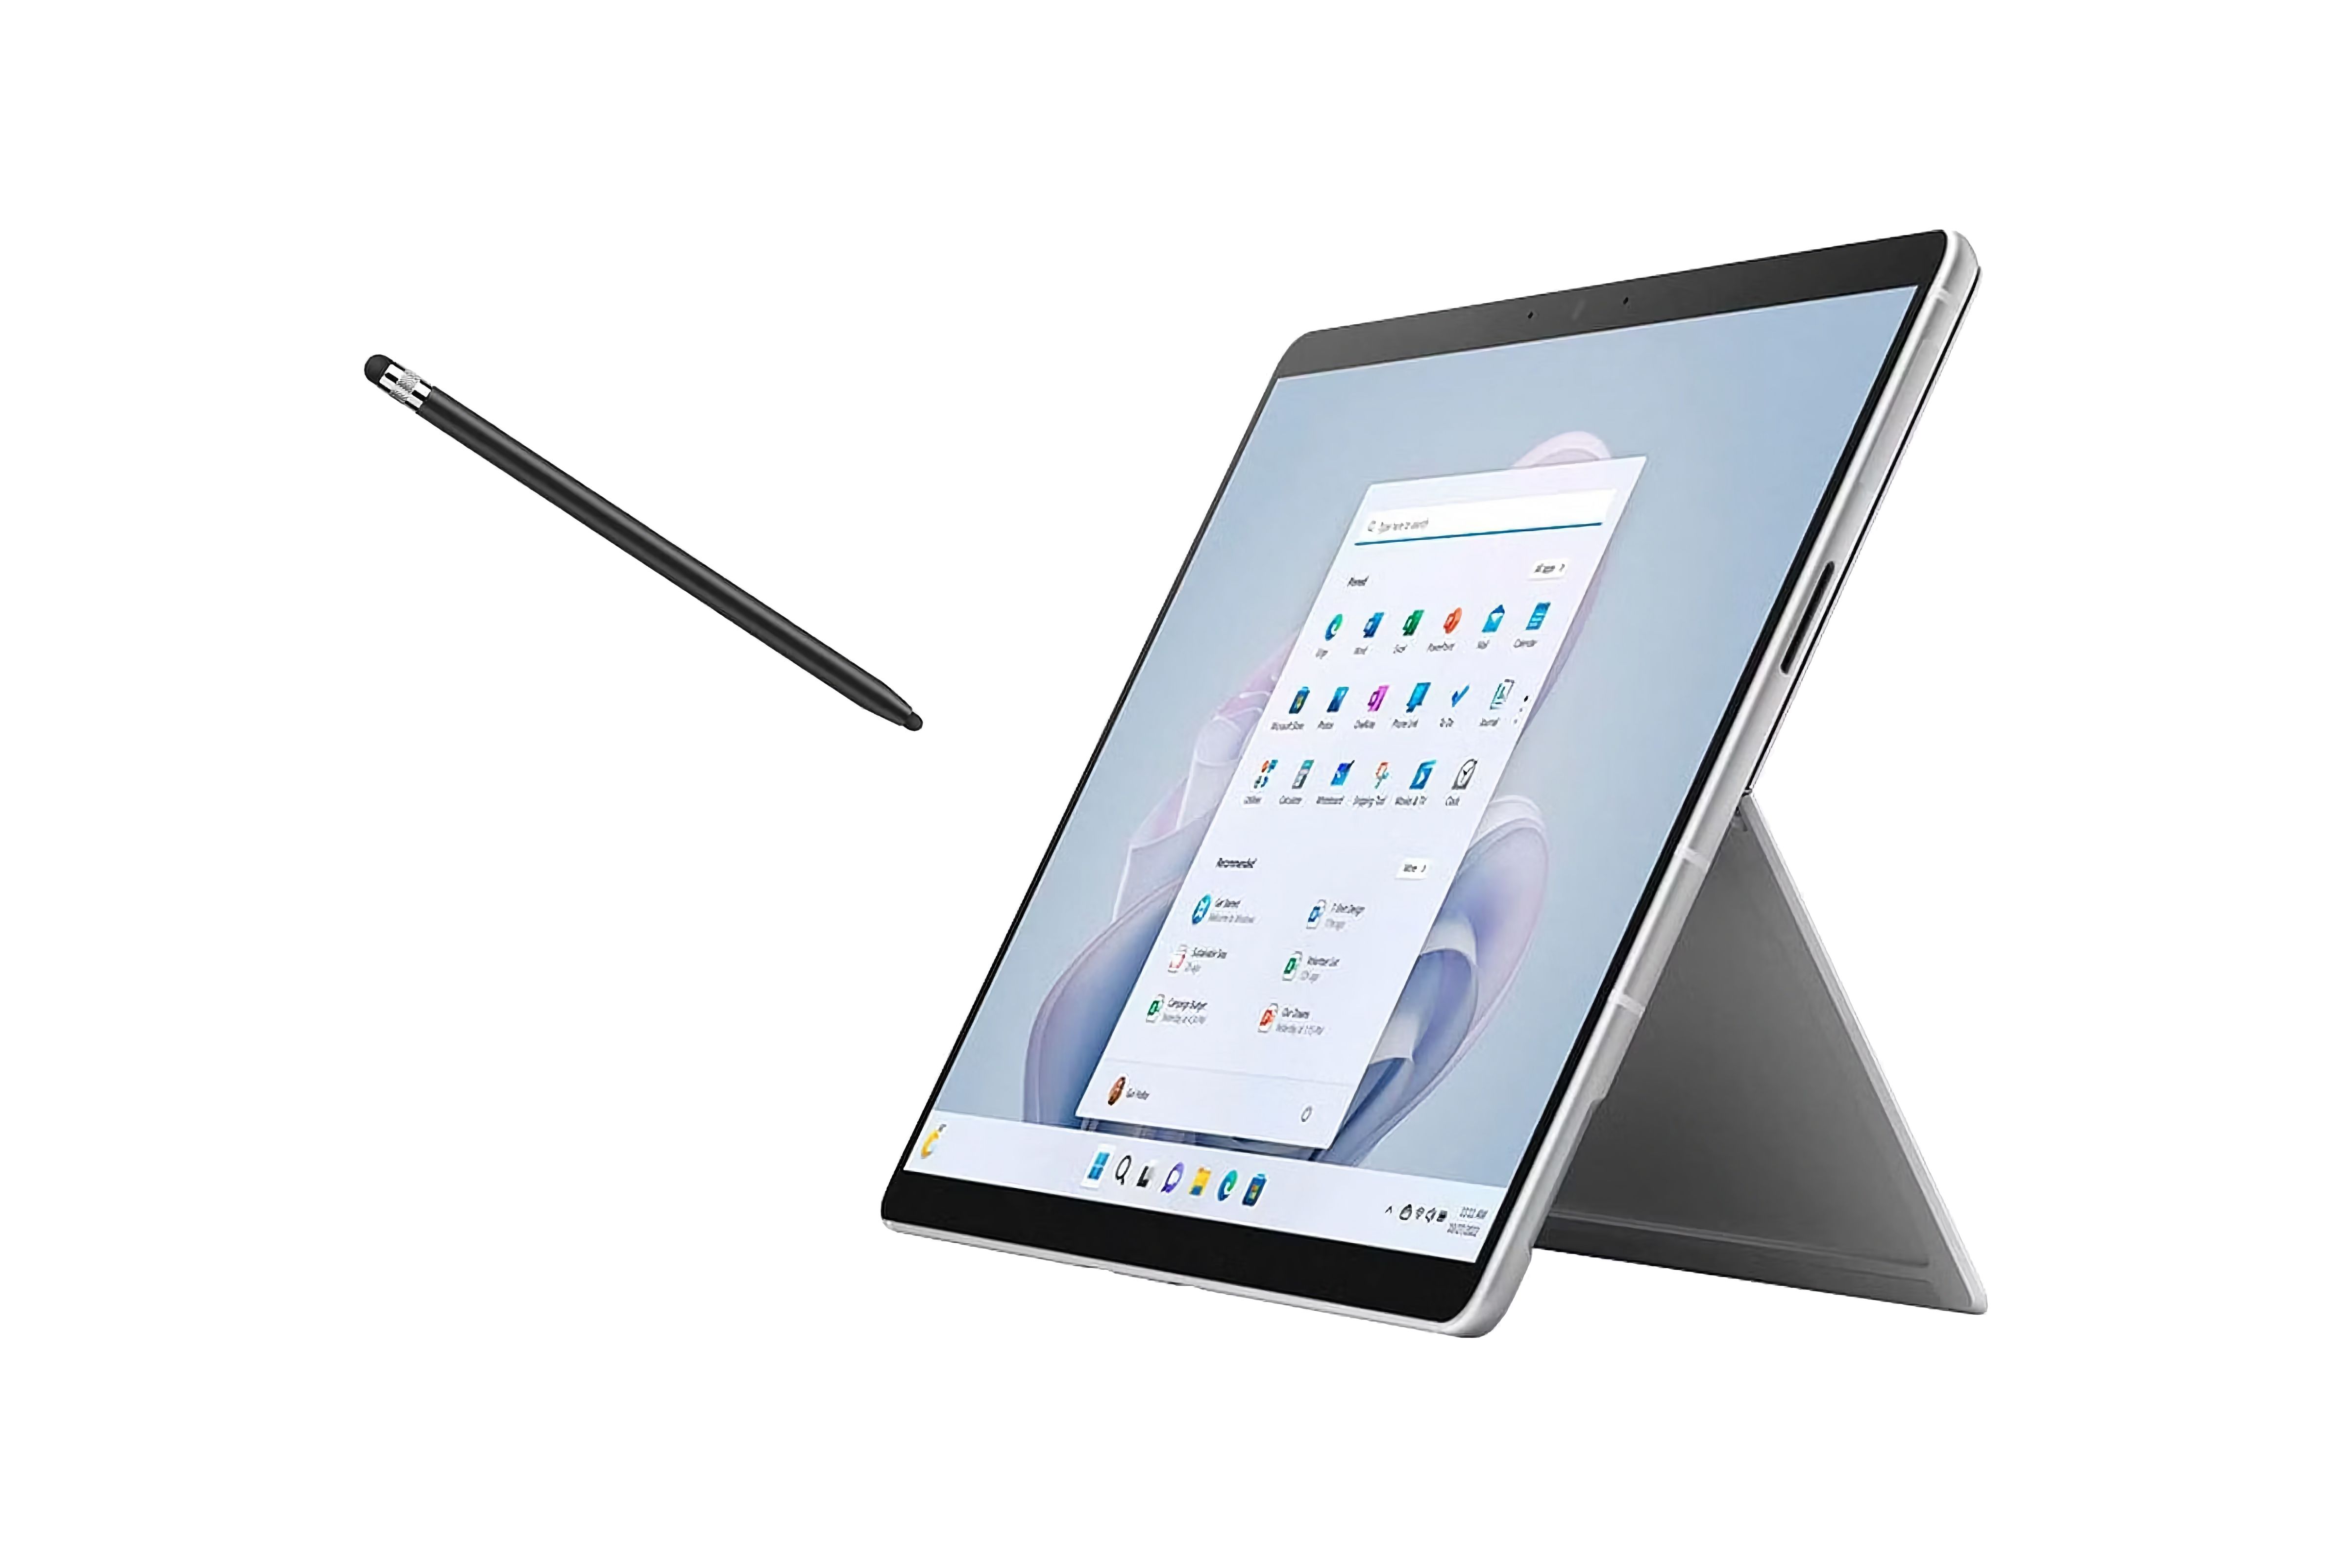 A horizontal silver tablet with a kickstand and a stylus floating in front of it.